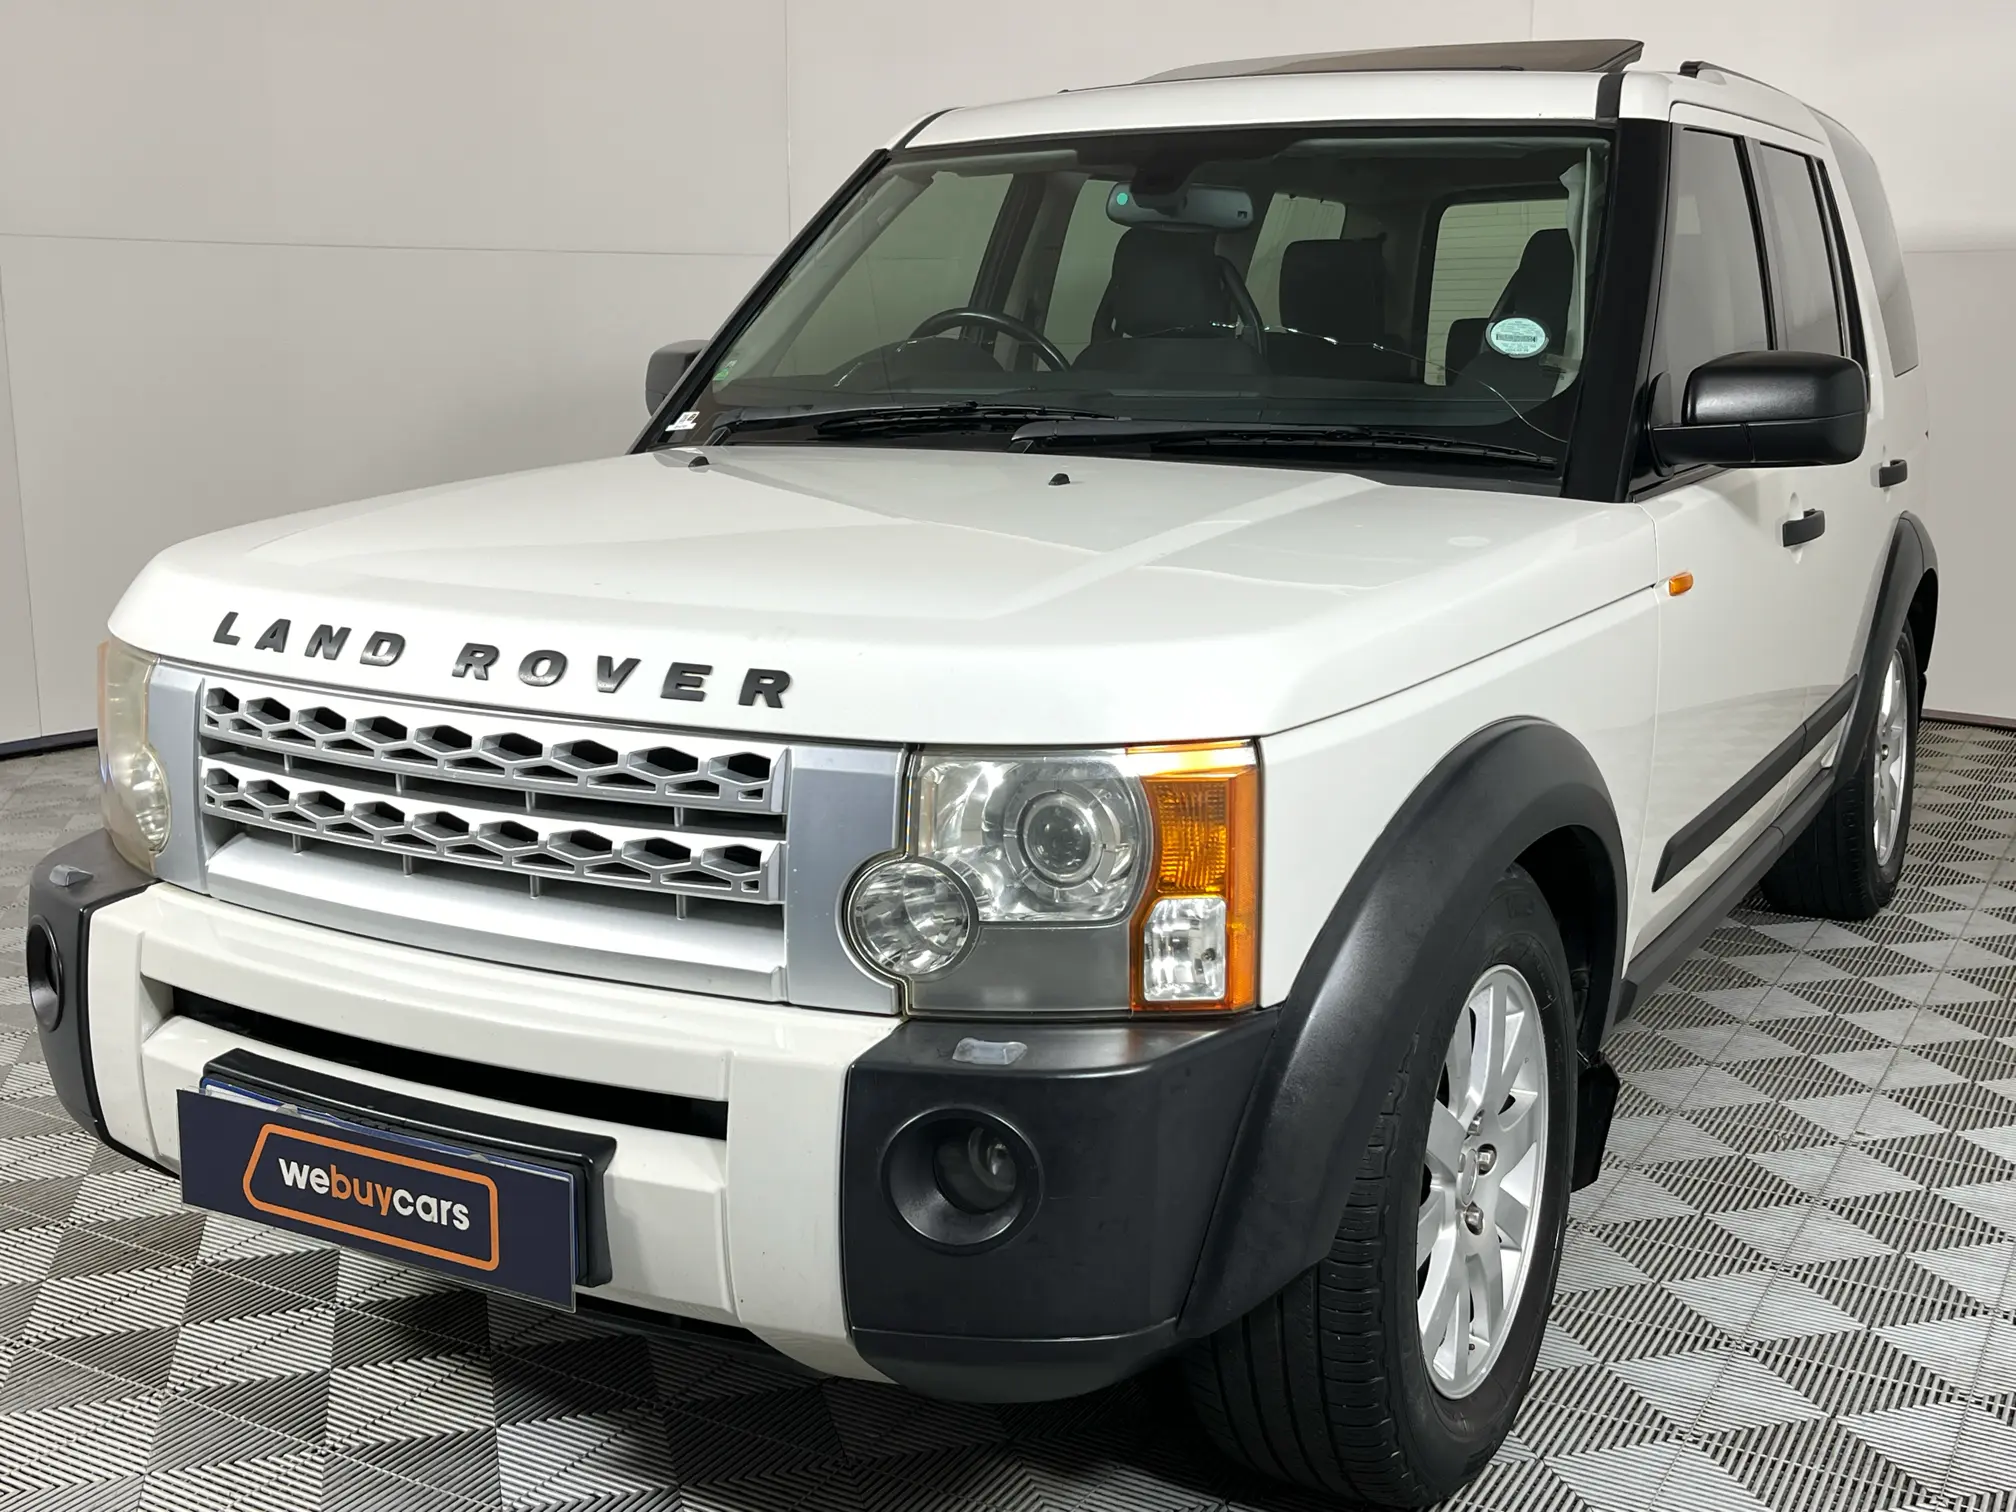 2005 Land Rover Discovery 3 V8 HSE Auto